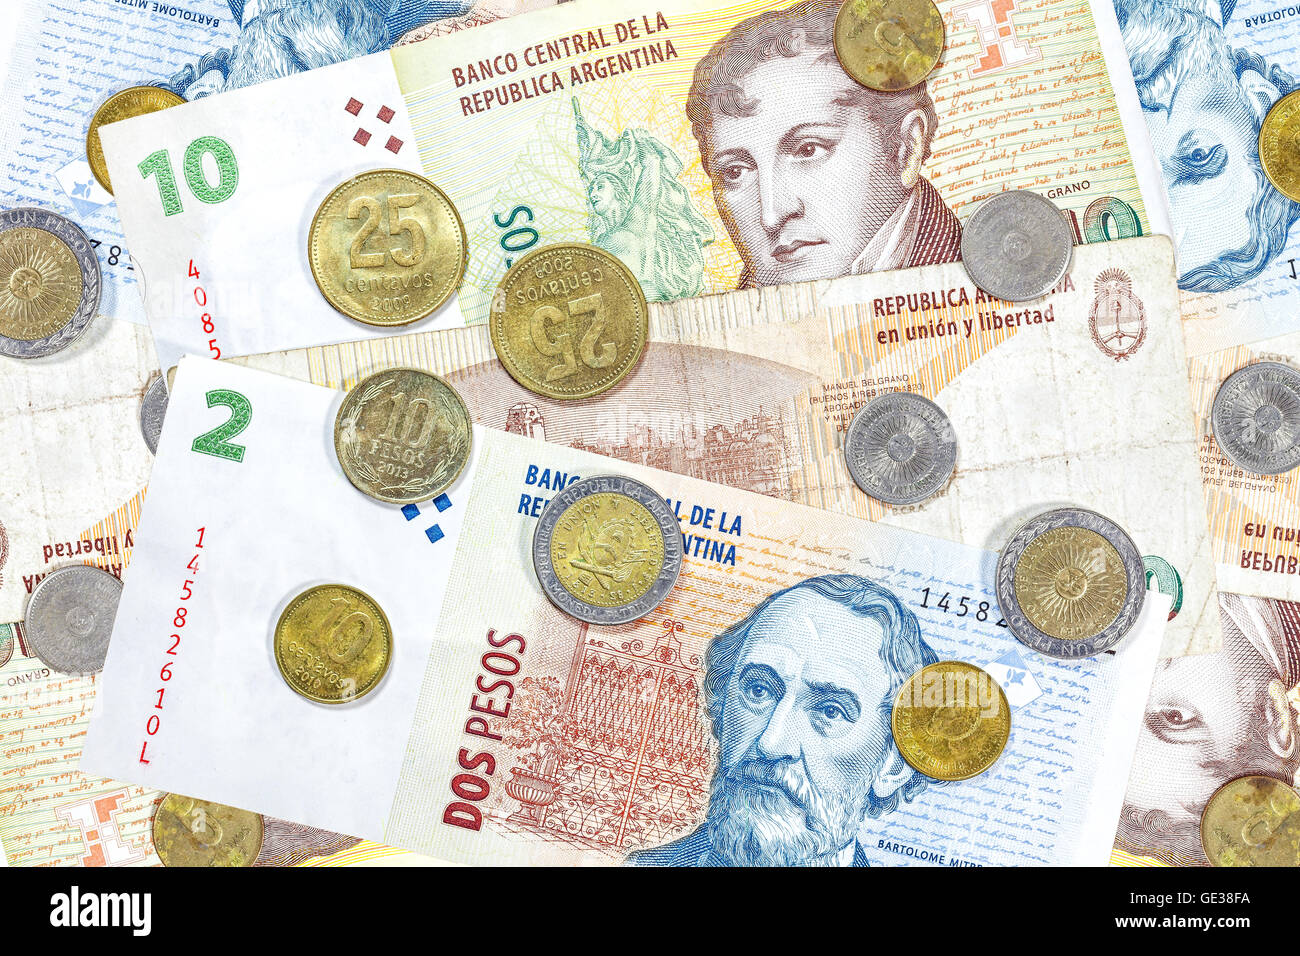 Money from Argentina, peso banknotes and coins. Stock Photo